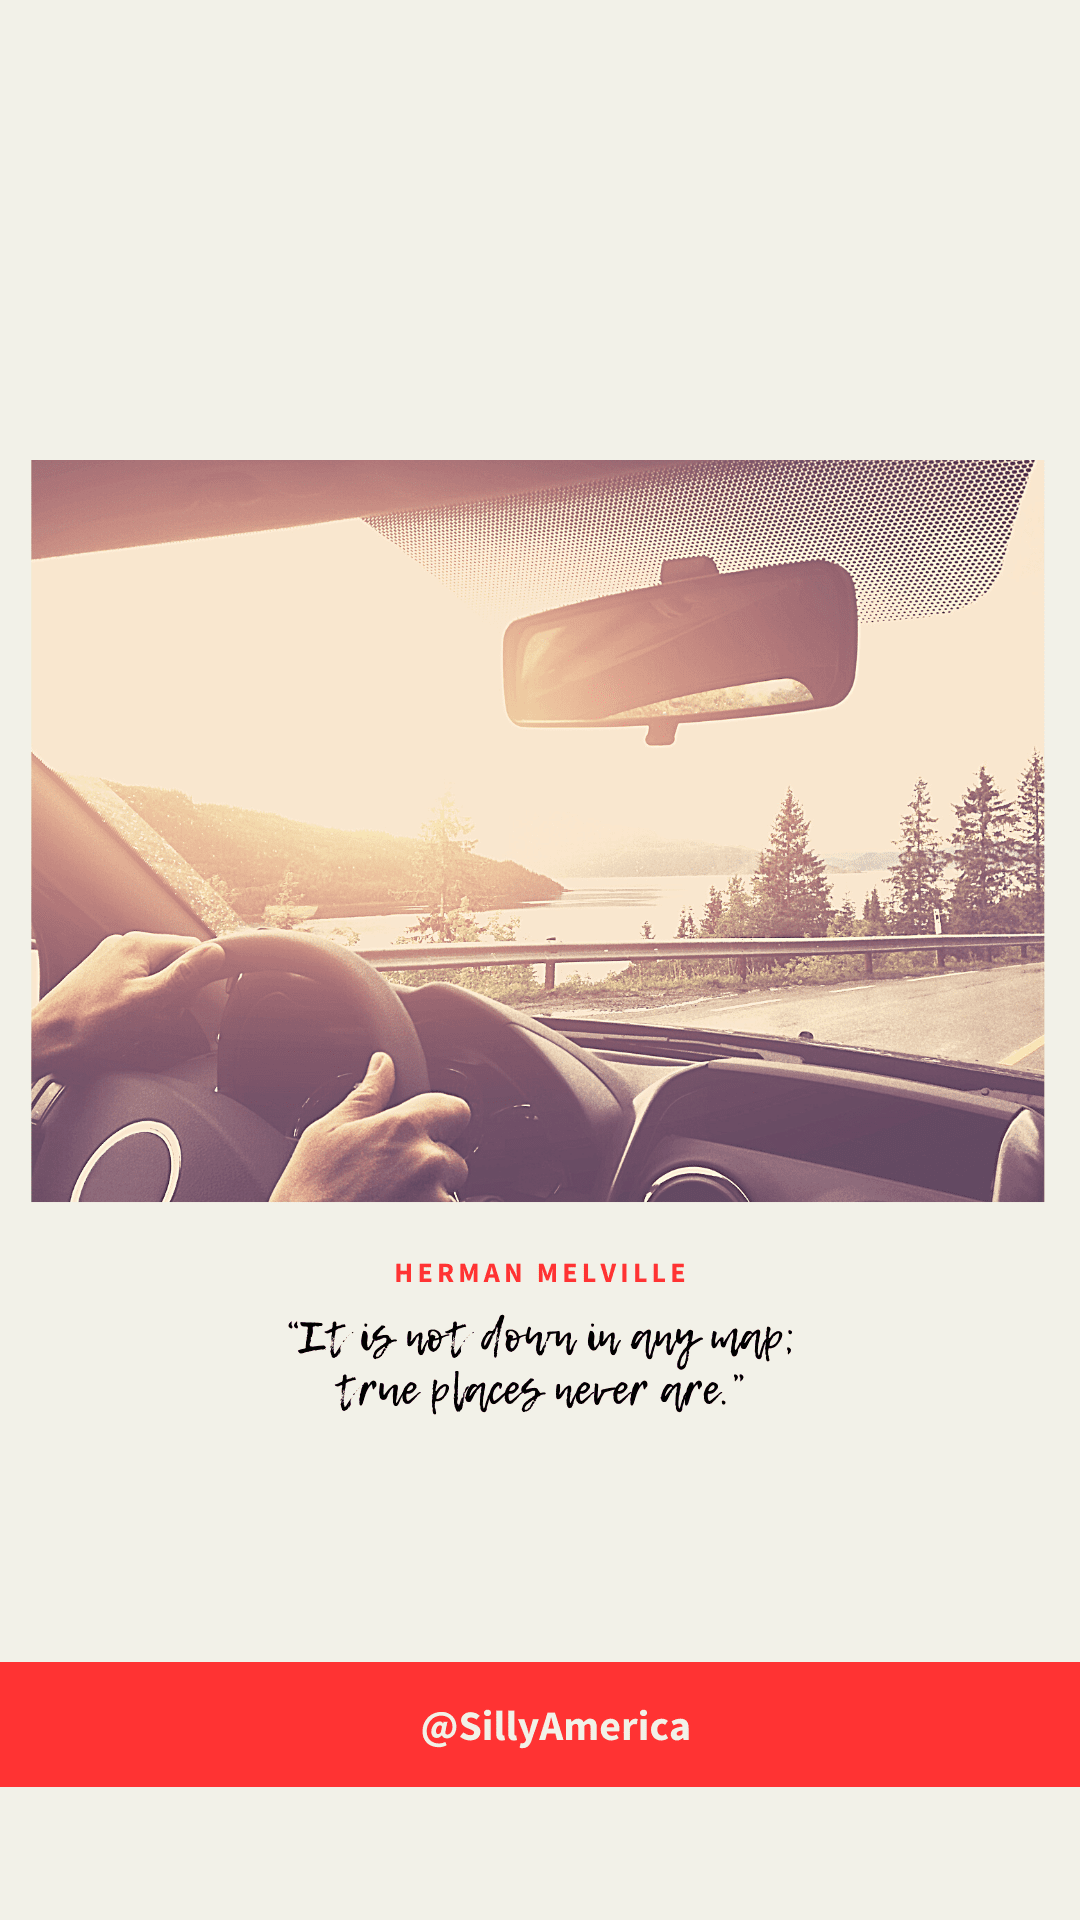 “It is not down in any map; true places never are.” Herman Melville, Moby-Dick